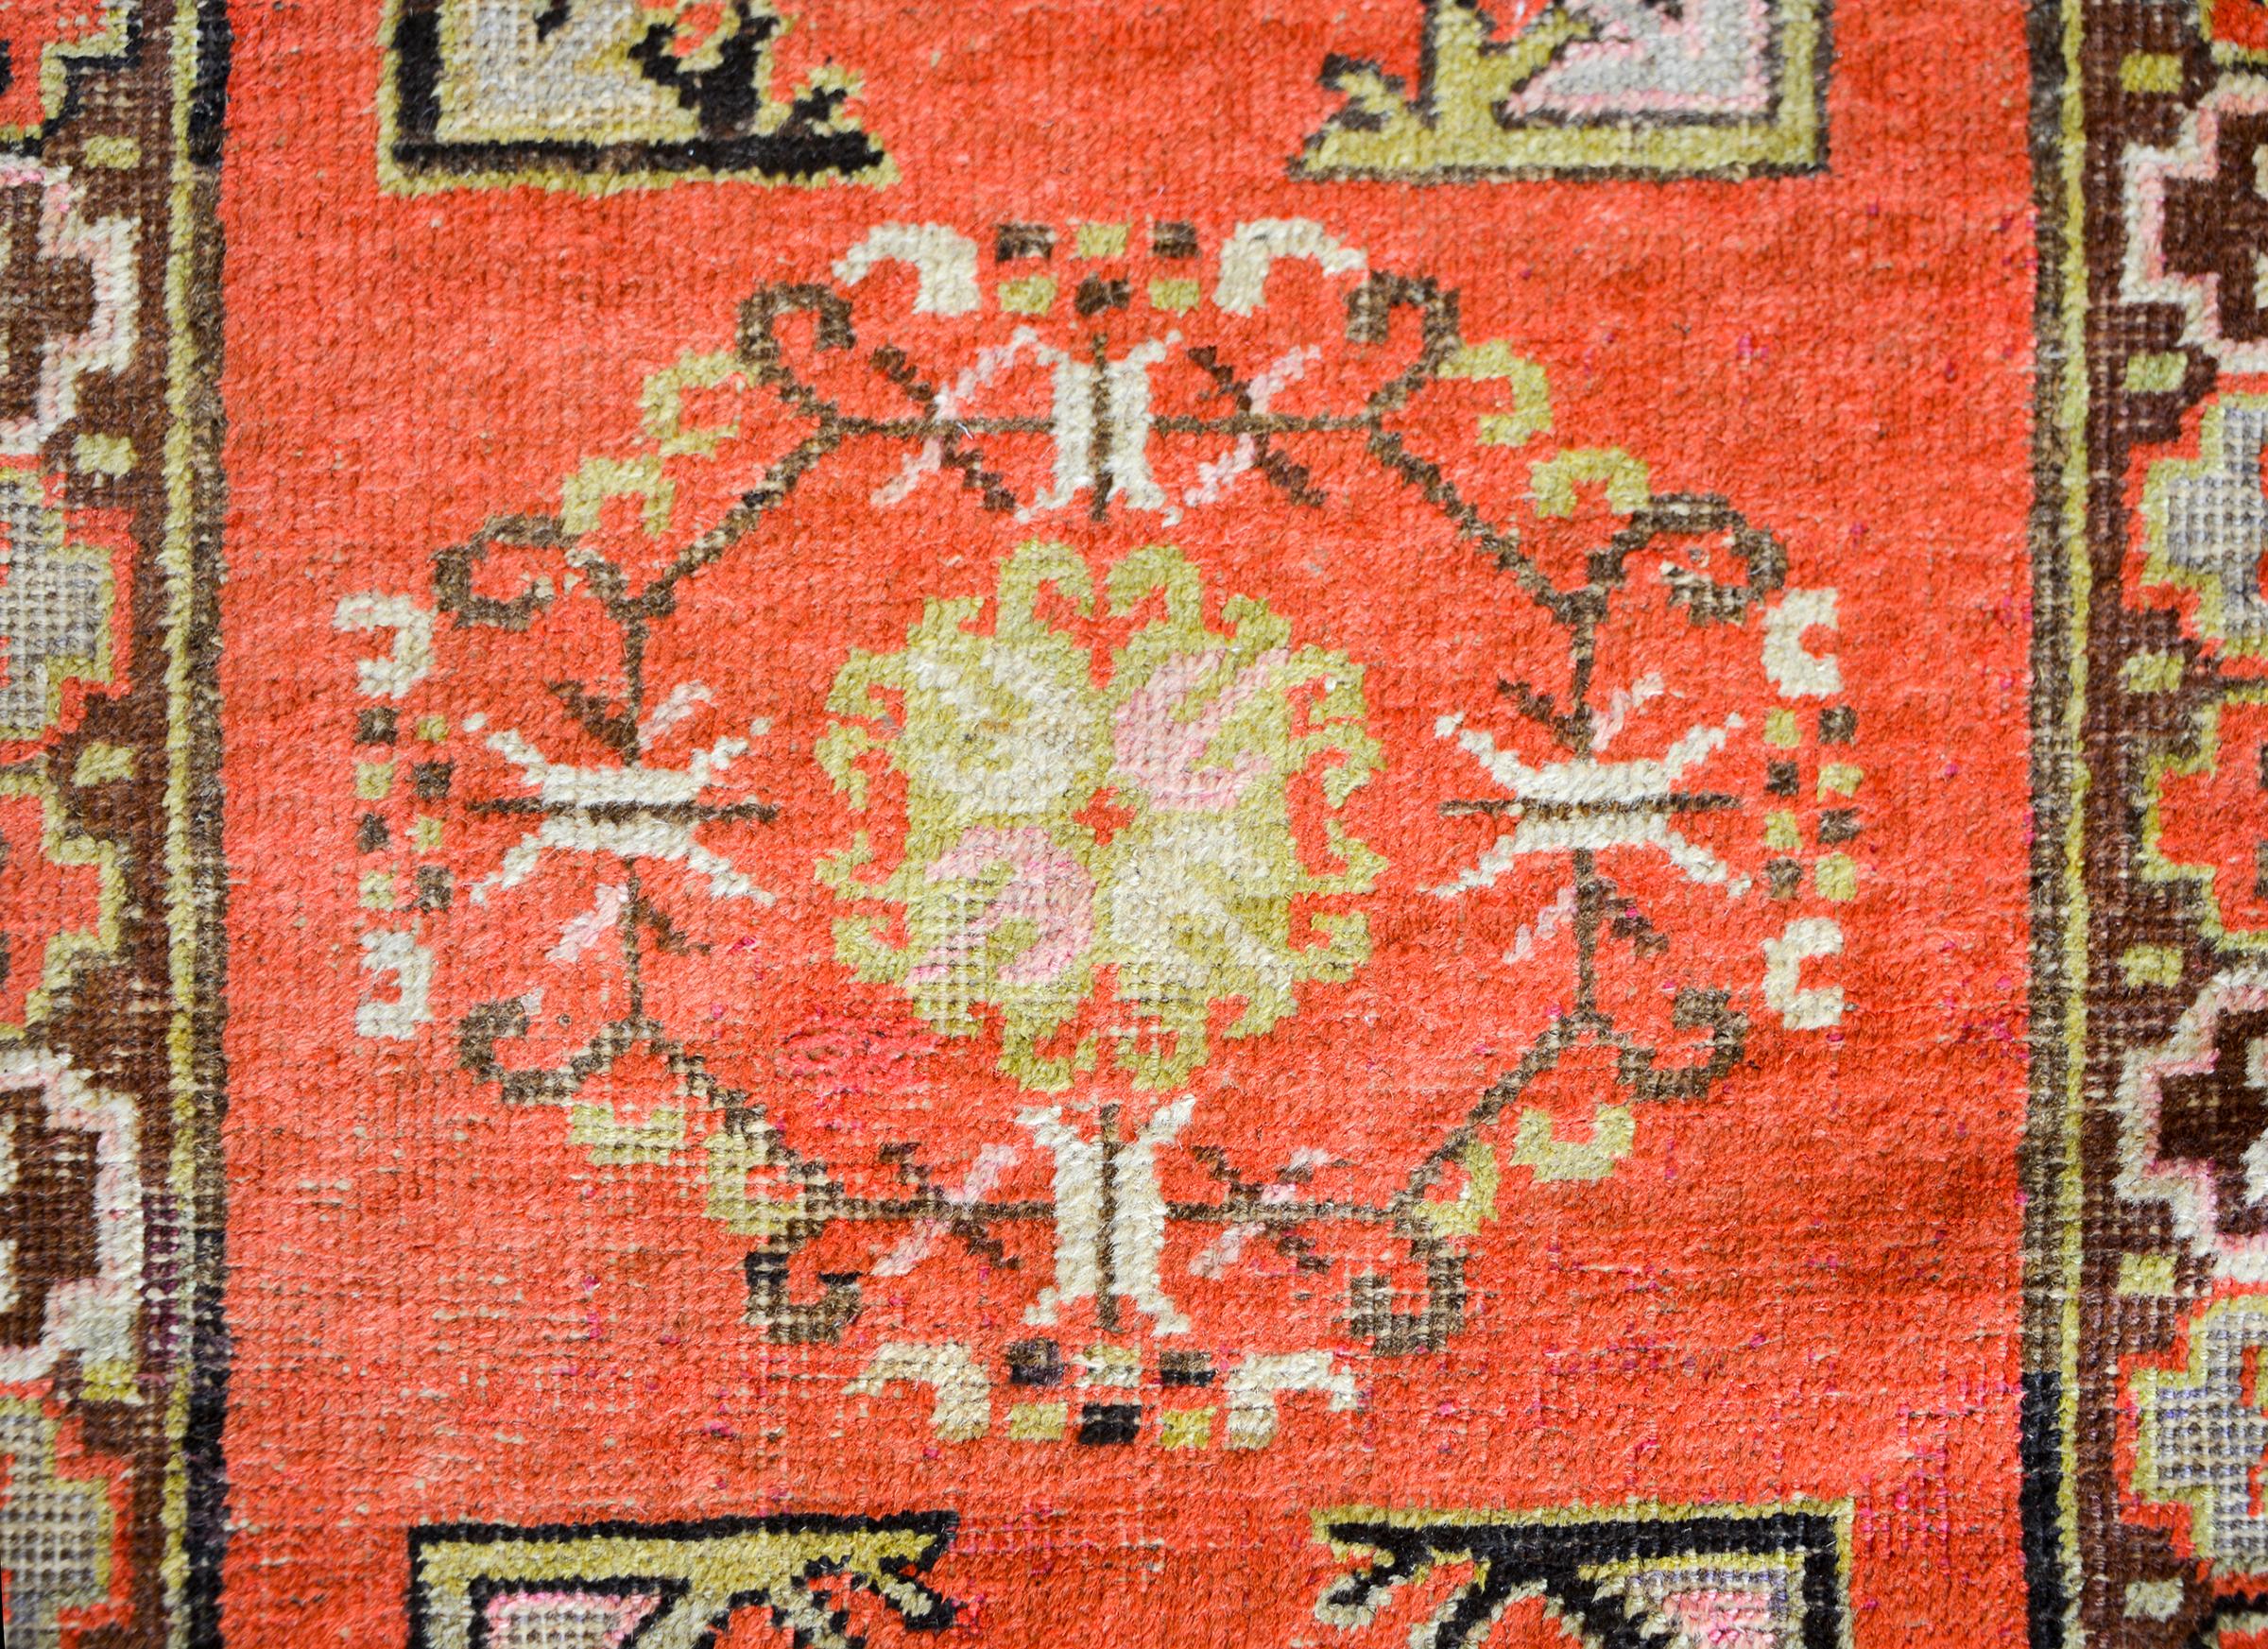 Wool Early 20th Century Khotan Rug For Sale